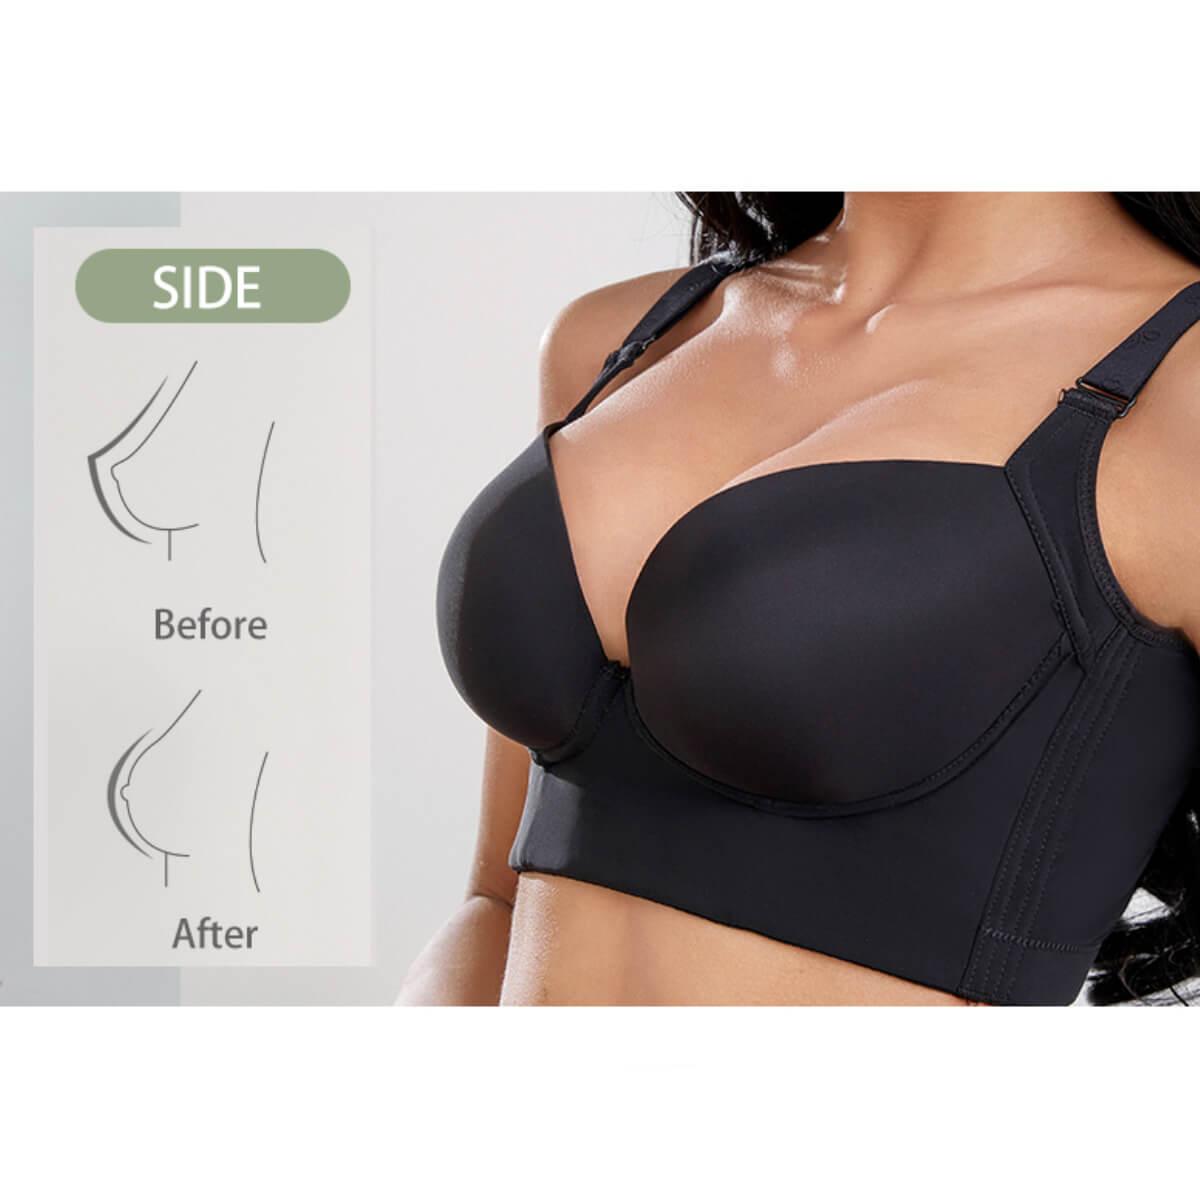 Wire-free Push Up Bra For Women - Deep V, Thick Mold Cup, Adjustable Straps